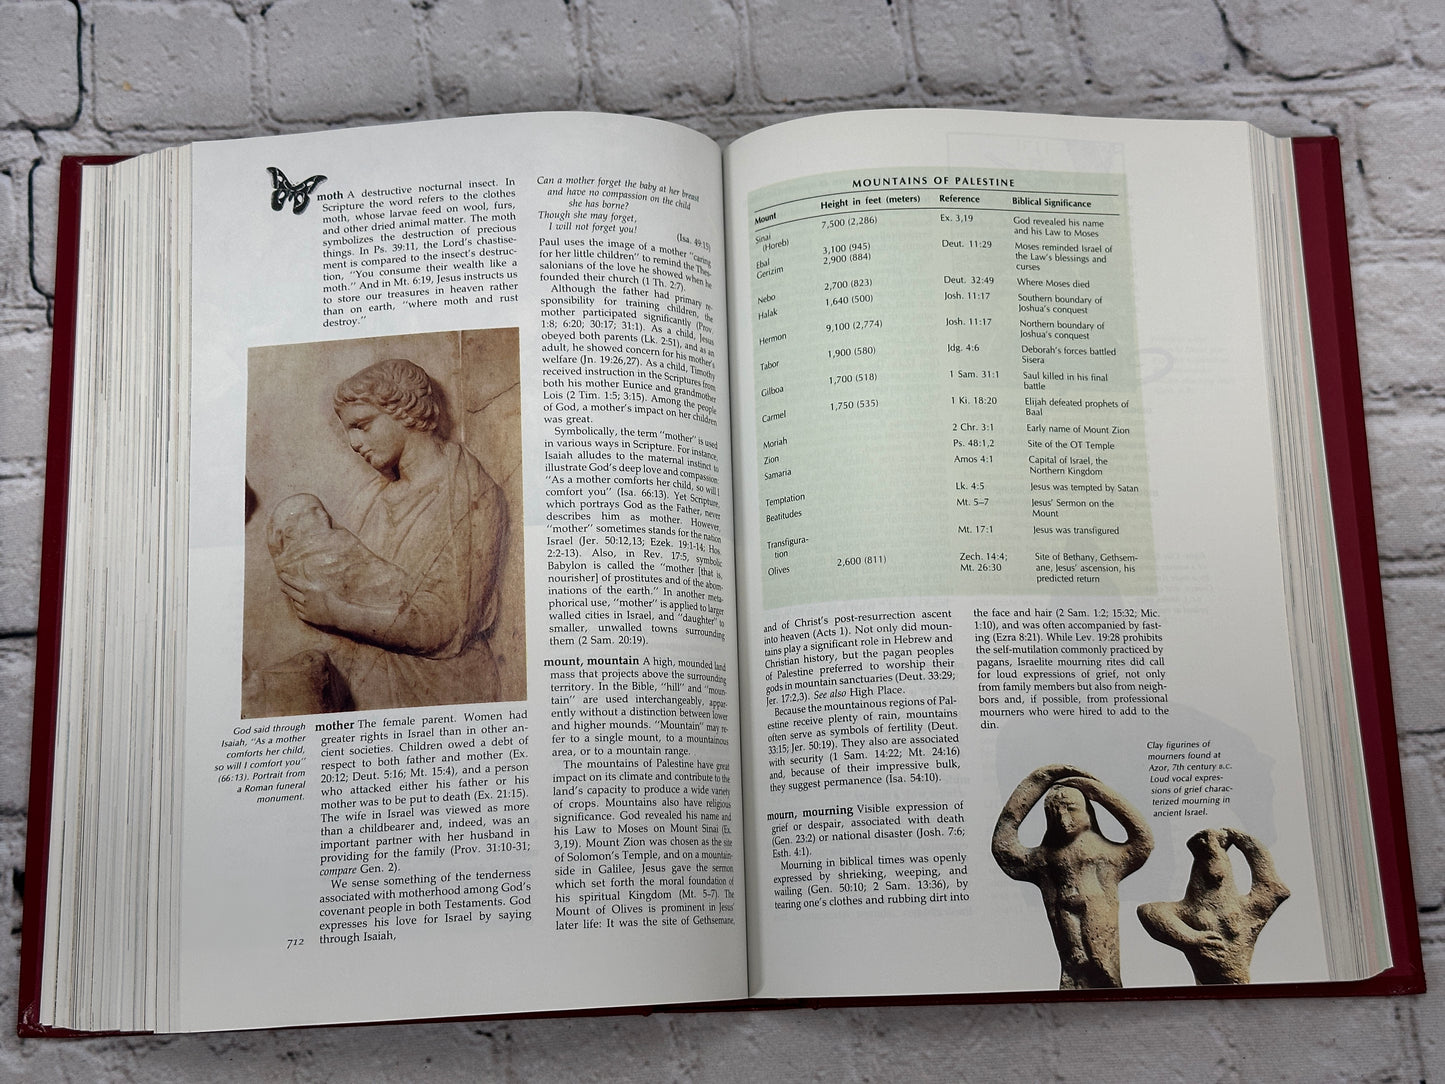 The Revell Bible Dictionary [Deluxe Color Edition · 1990]